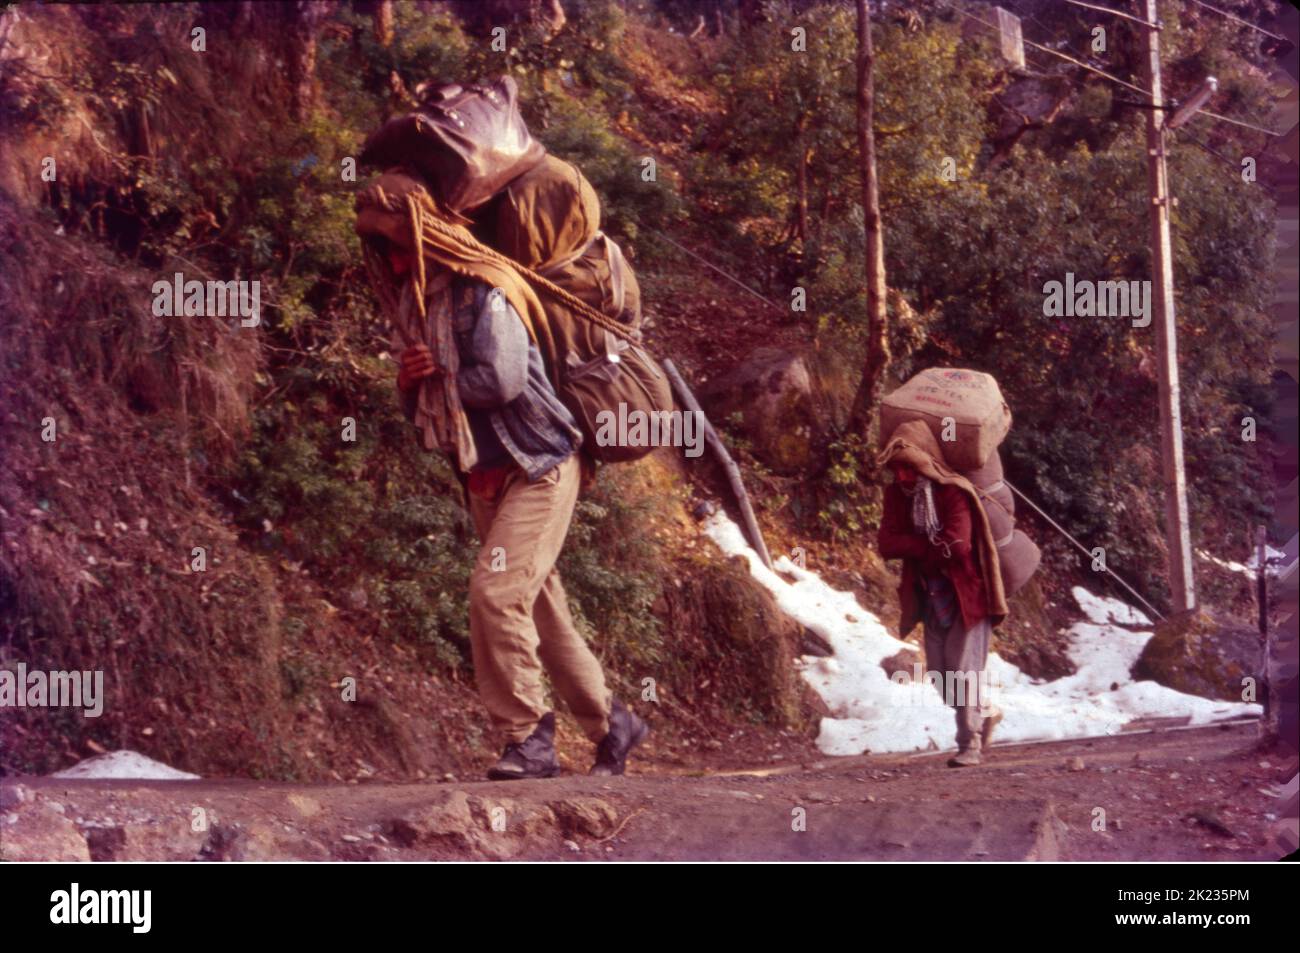 Pithoos (People Carrying Load on their Back's) Dalhousie, Himachal Pradesh Stock Photo